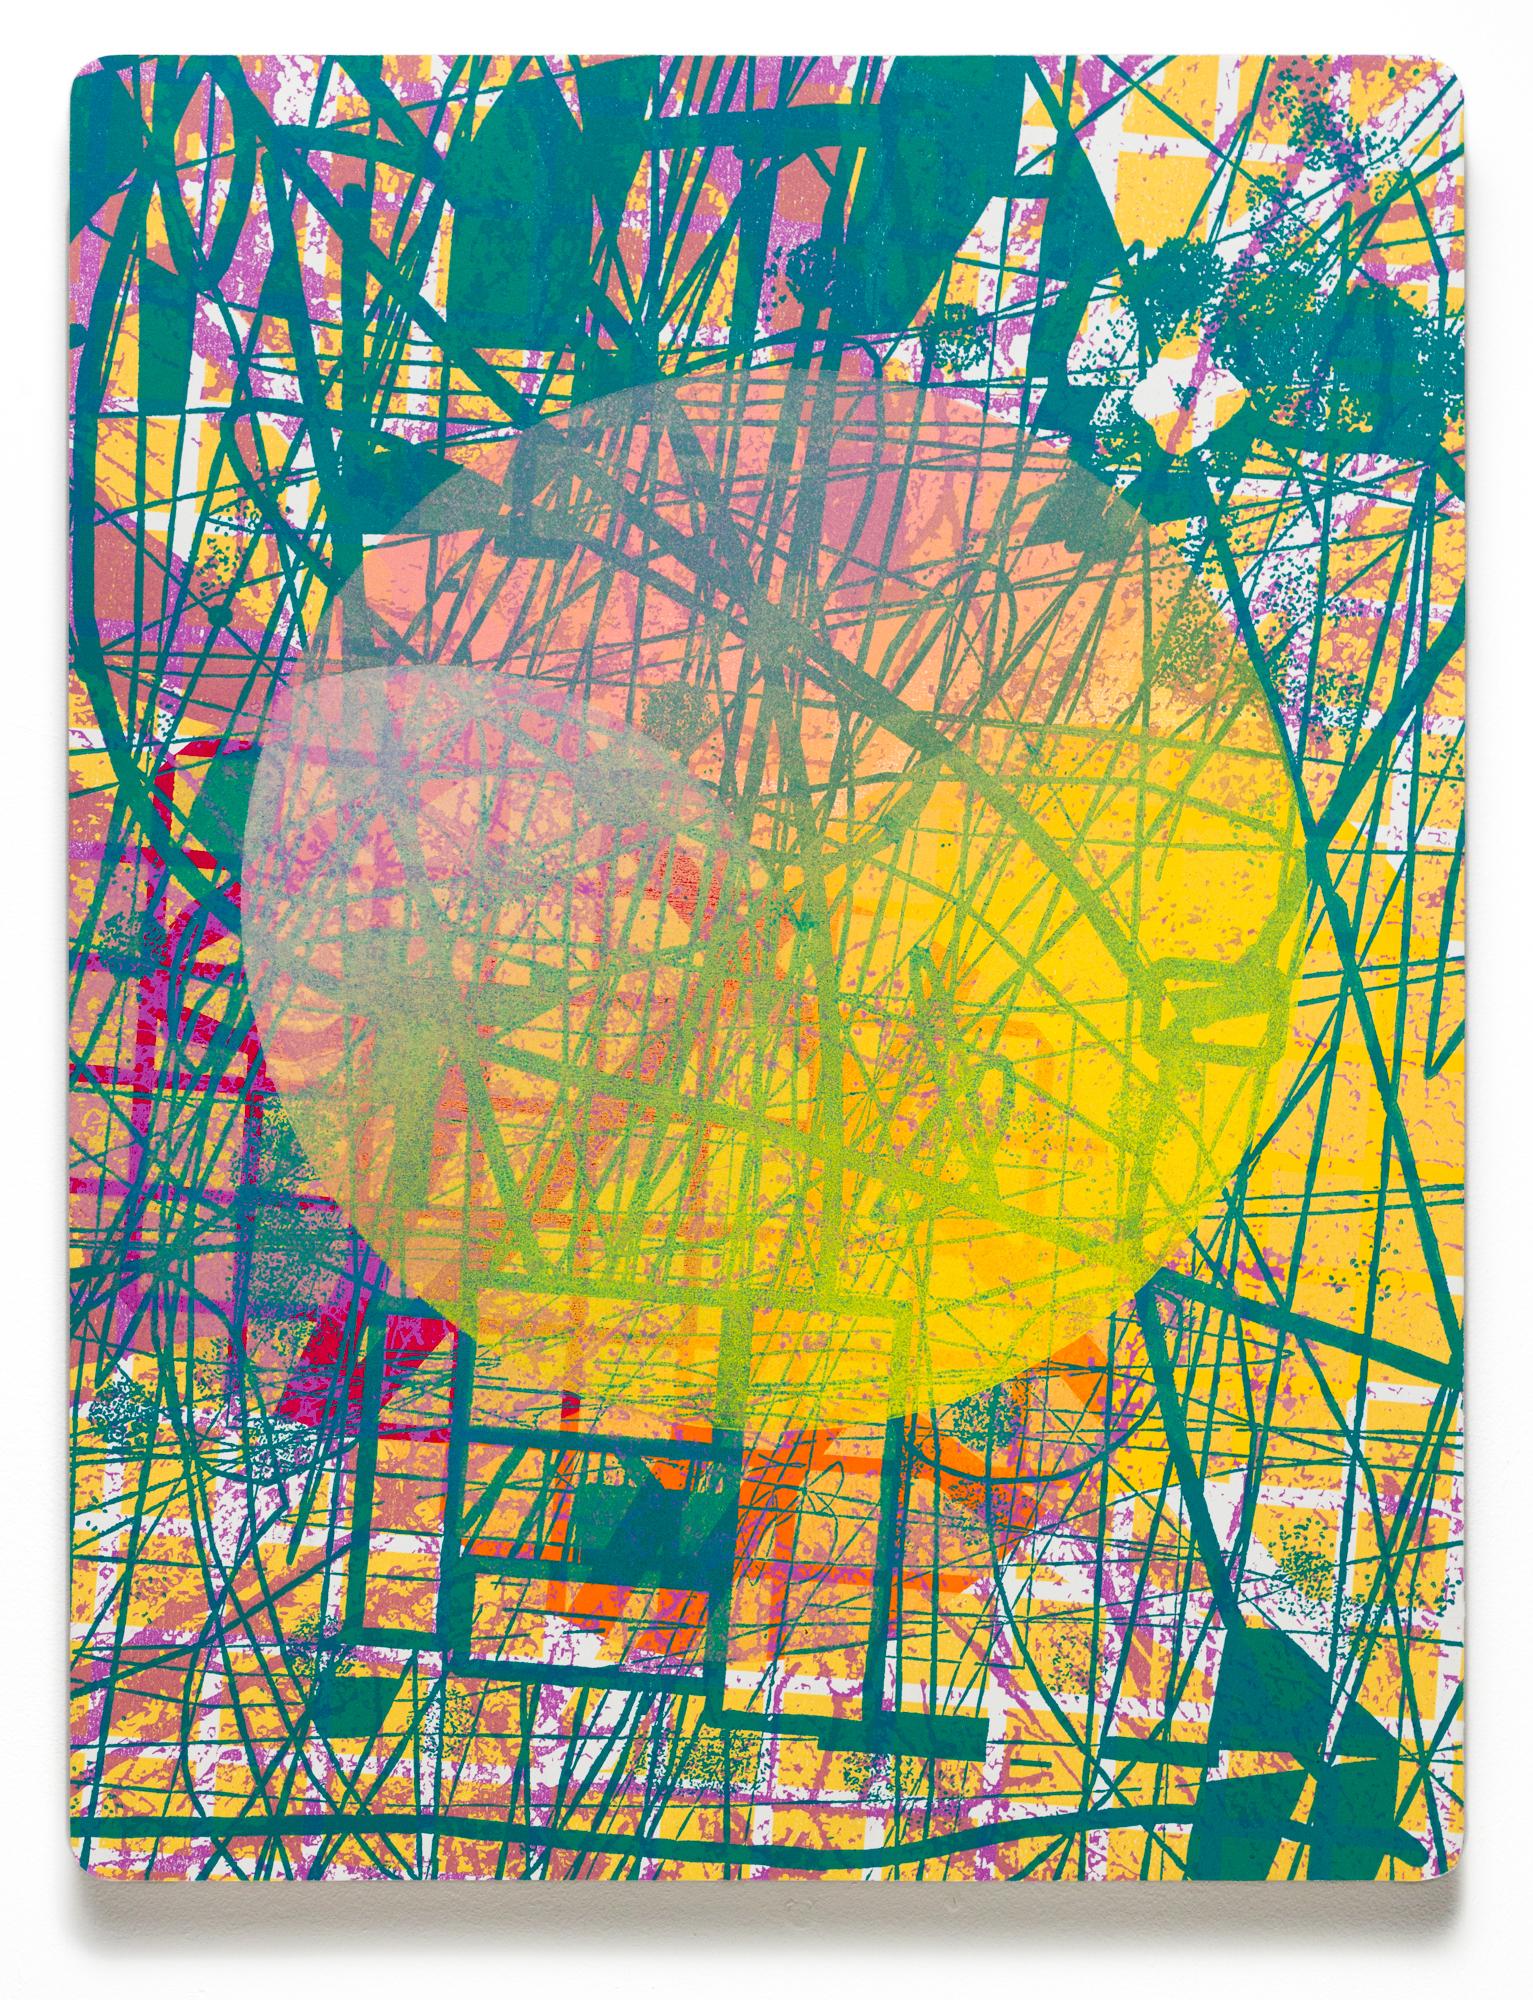 Alexis Nutini Abstract Print - "Sunset One", Abstract Patterns, Geometric Abstraction, Woodcut, Monoprint